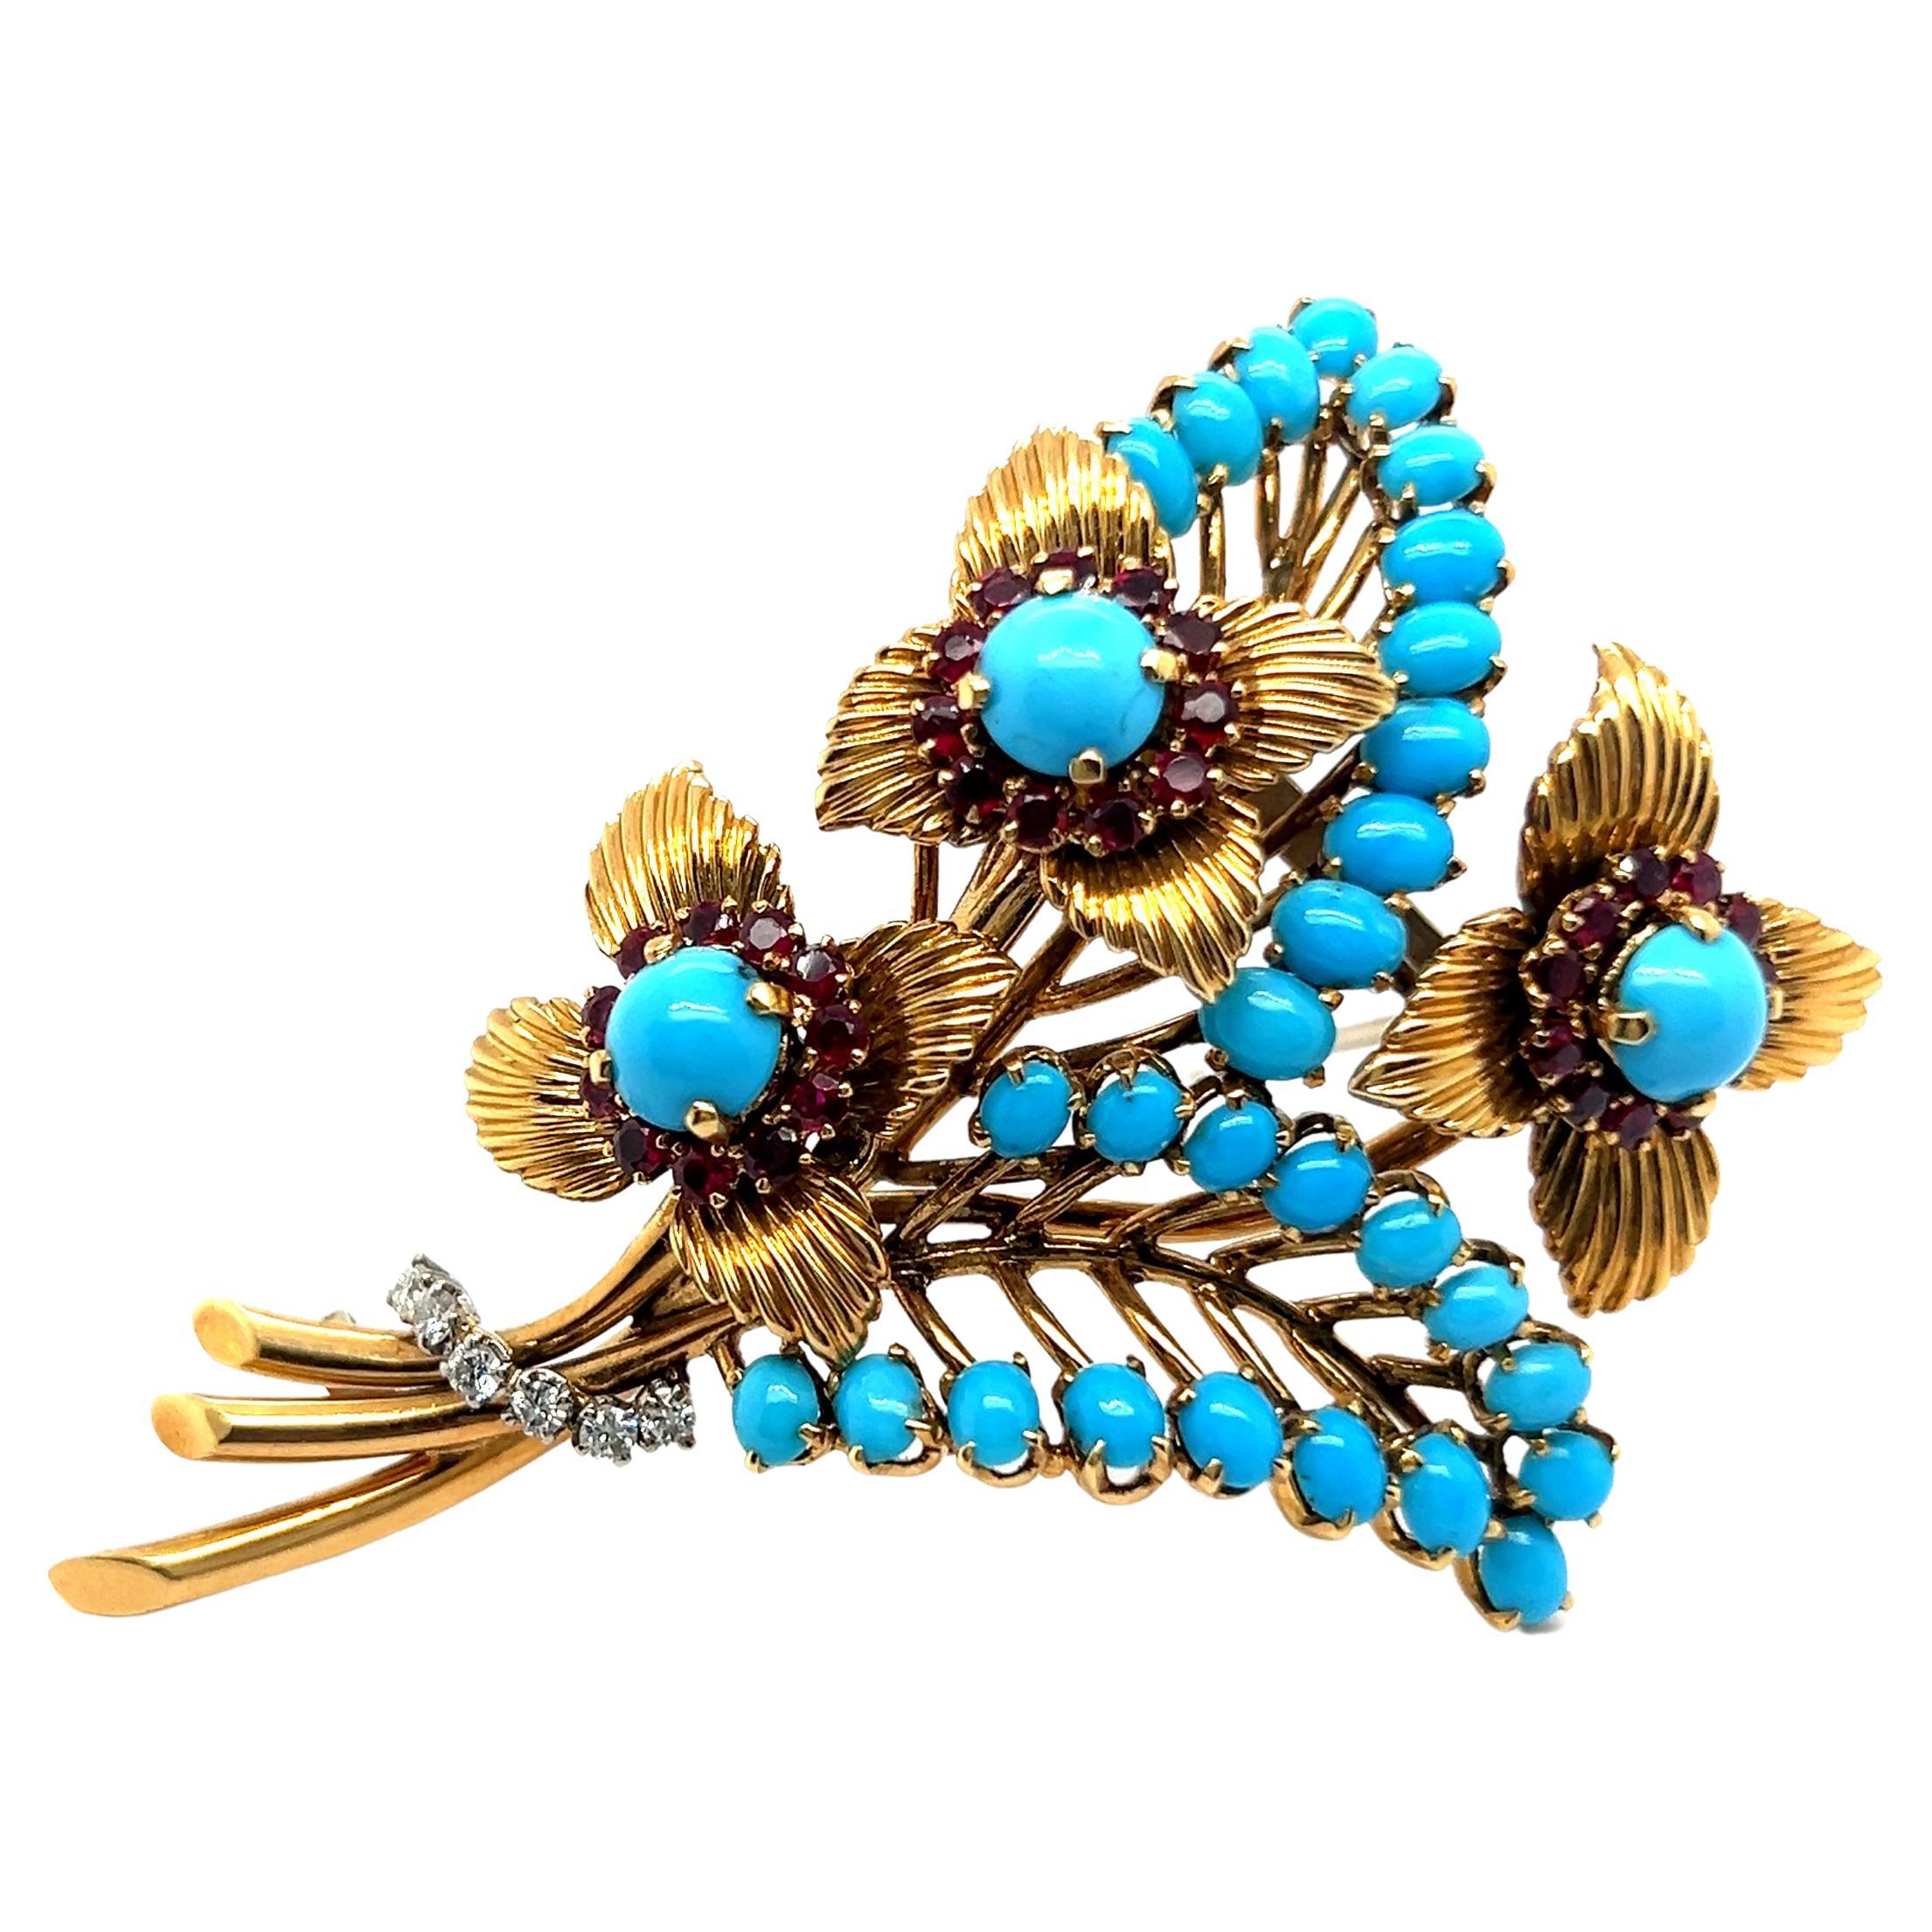 Brooch with Turquoise, Rubies & Diamonds in 18 Karat Yellow Gold by Gübelin